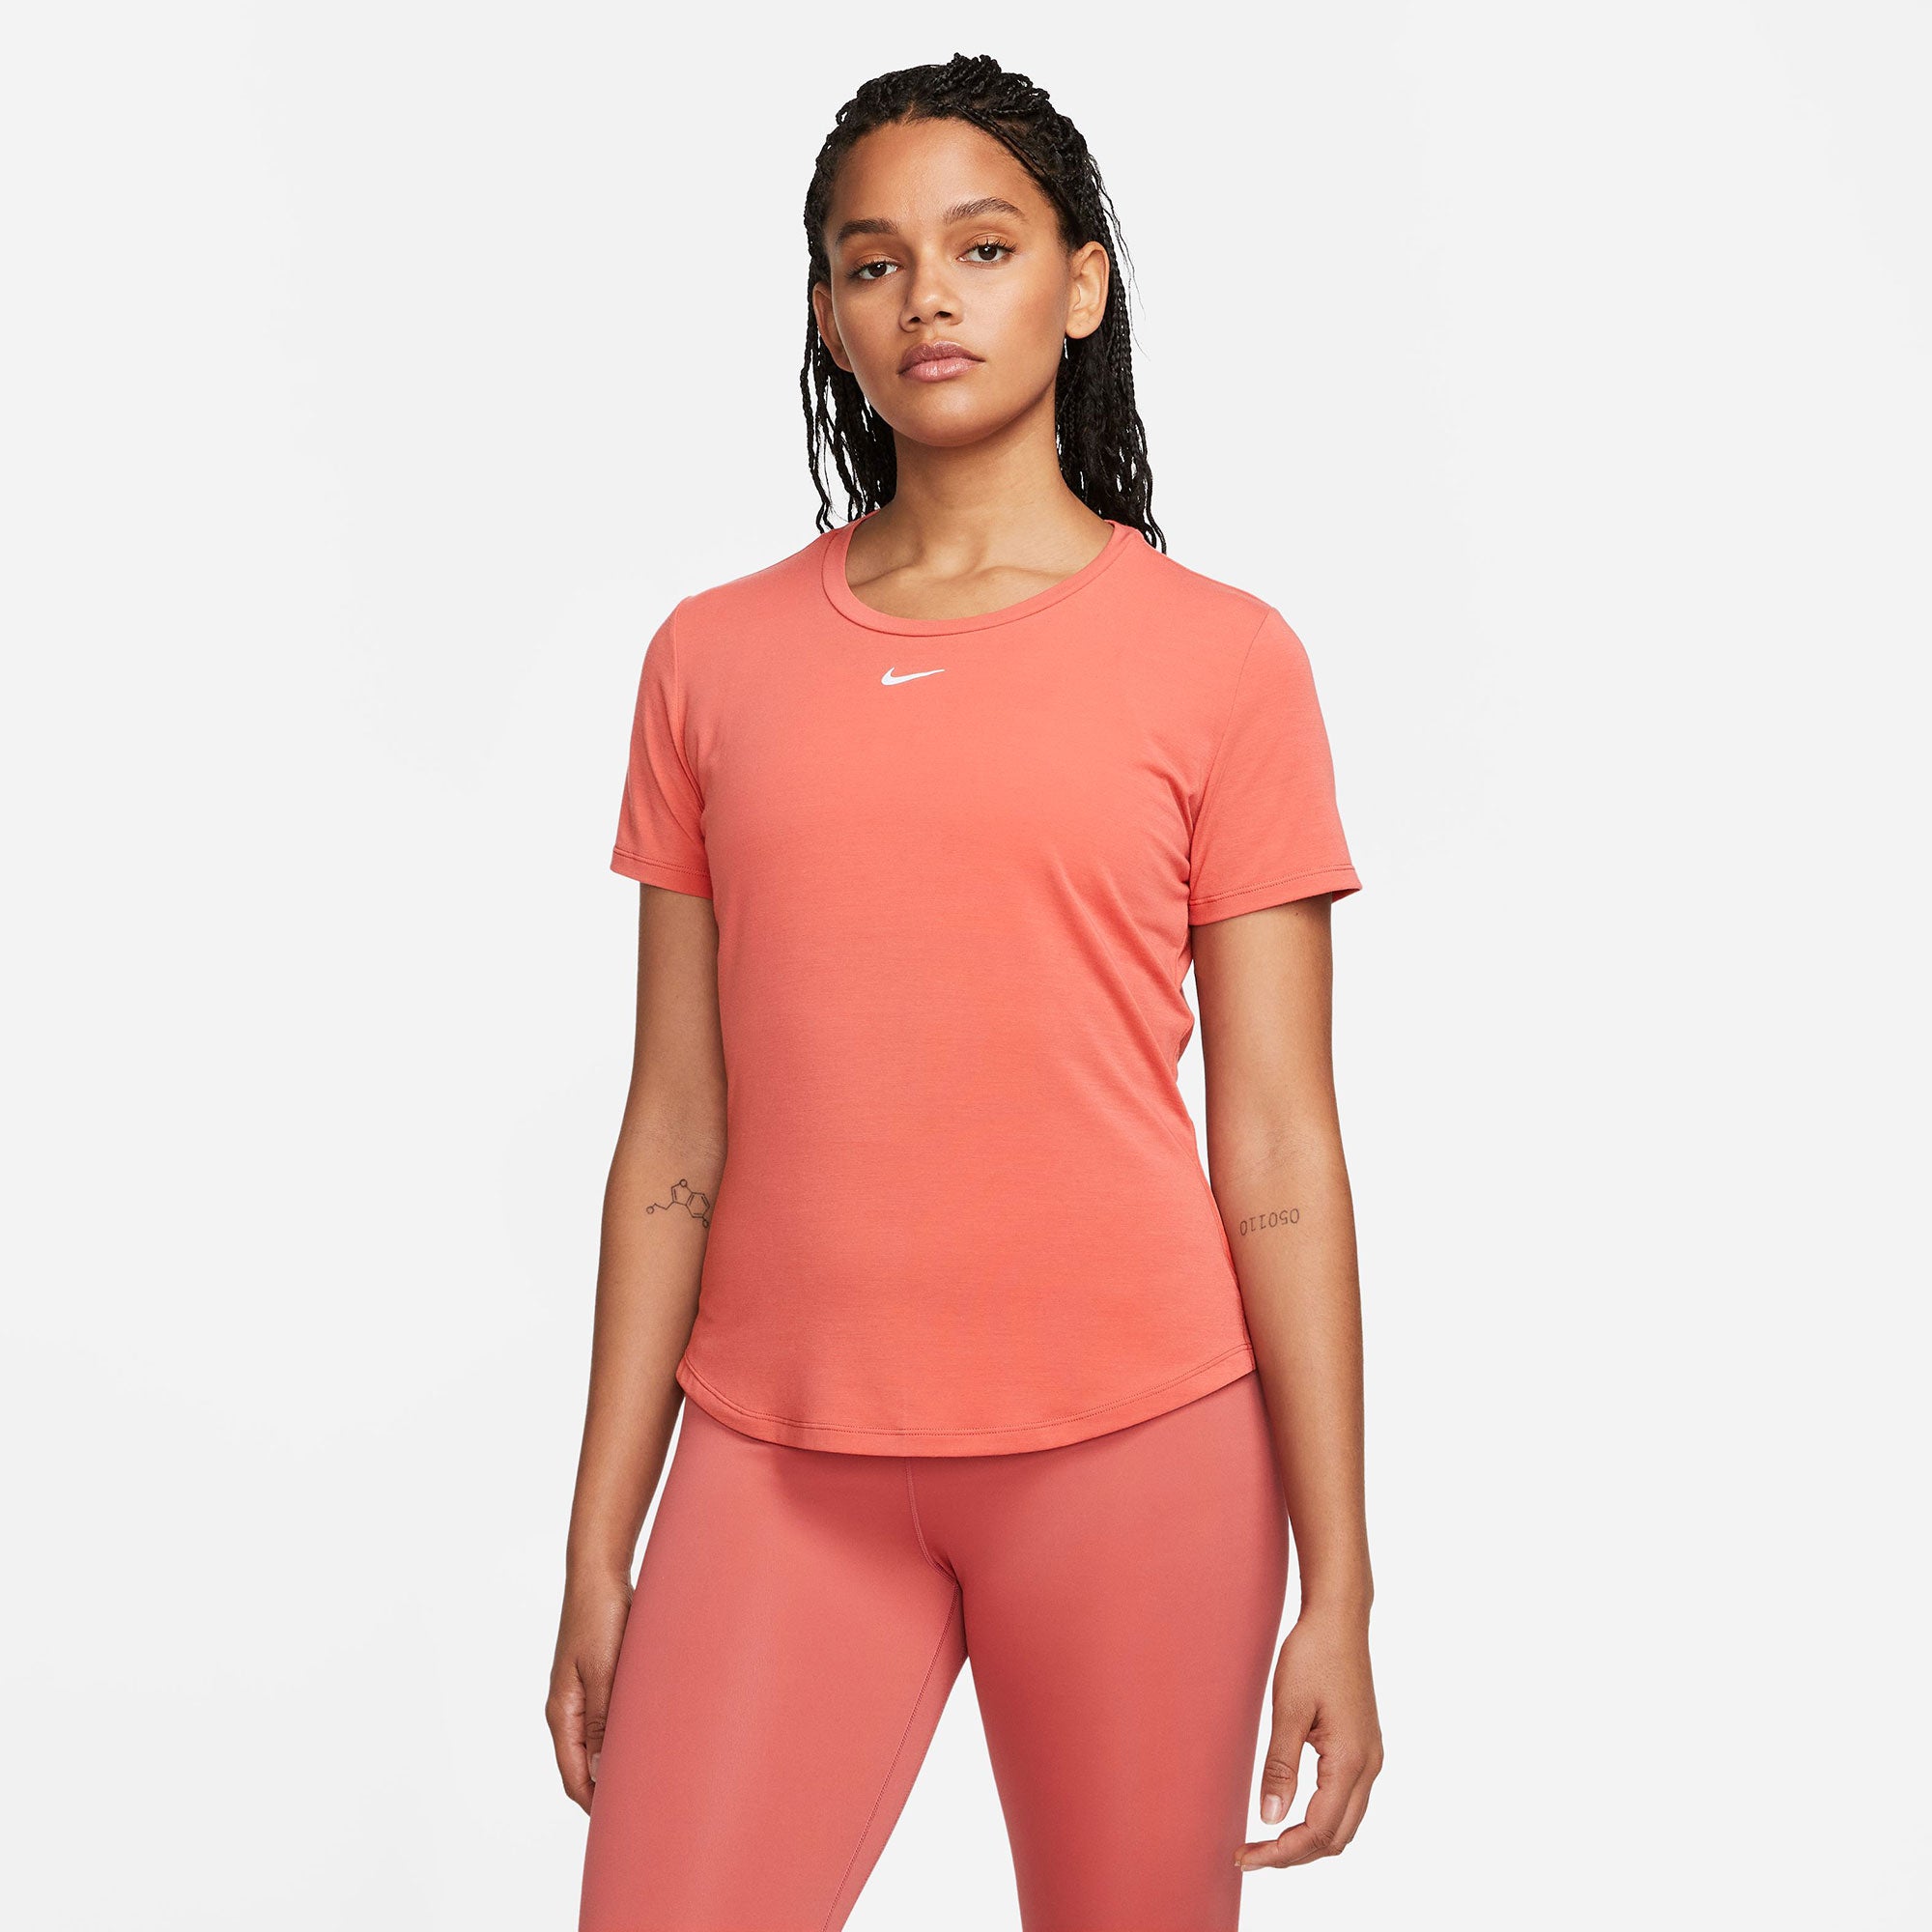 Nike One Luxe Dri-FIT Women's Standard Fit Shirt Red (1)